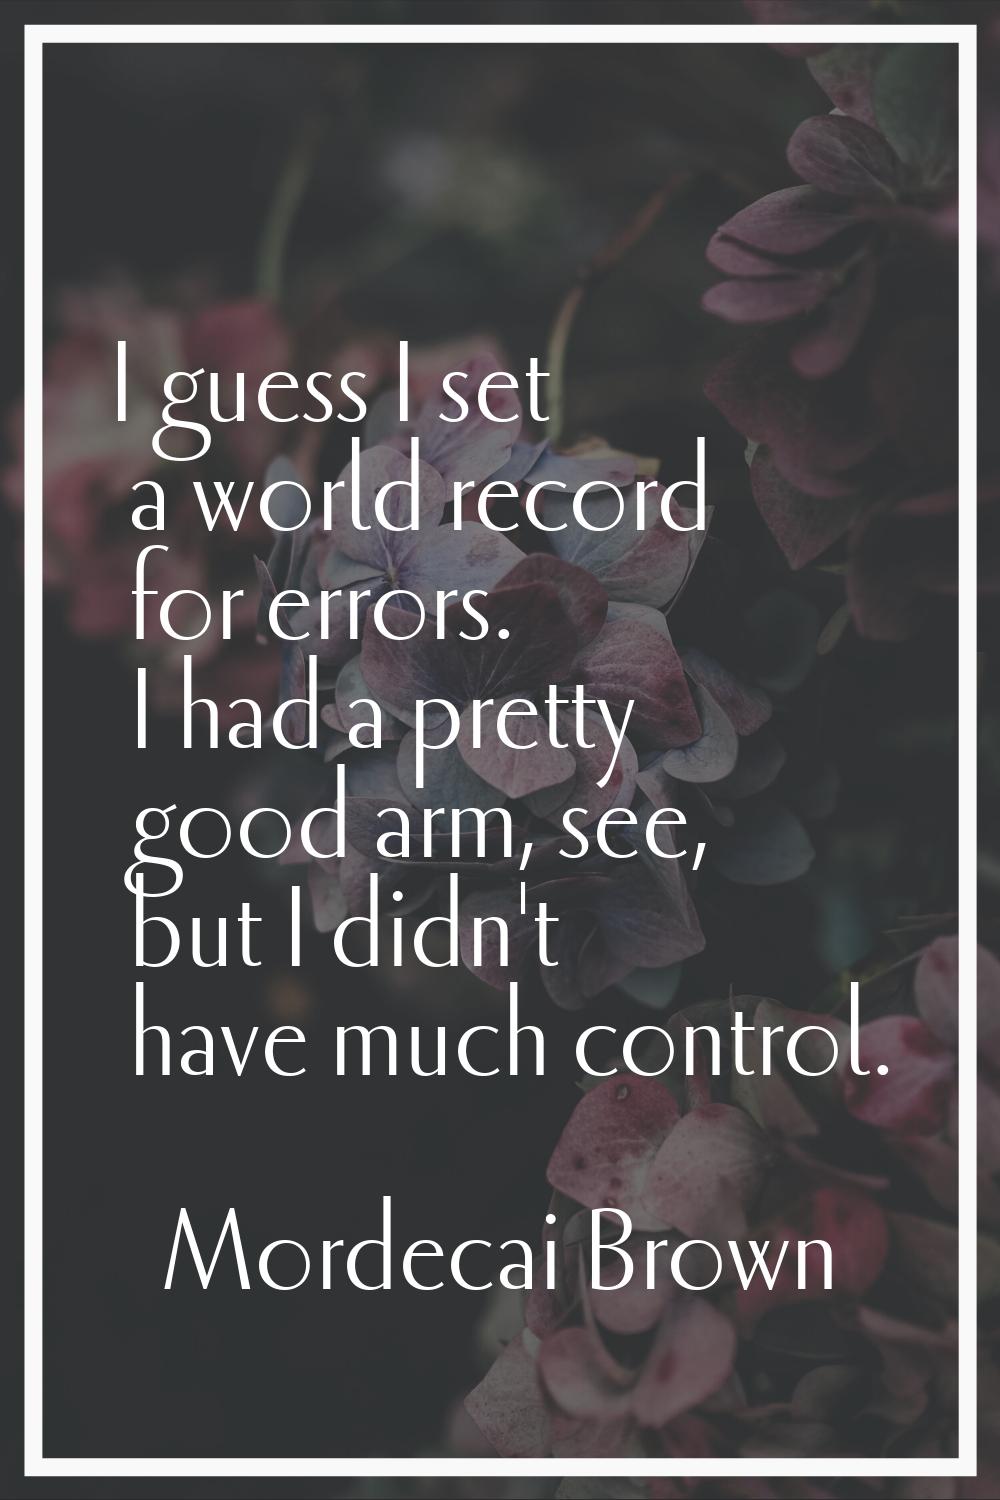 I guess I set a world record for errors. I had a pretty good arm, see, but I didn't have much contr